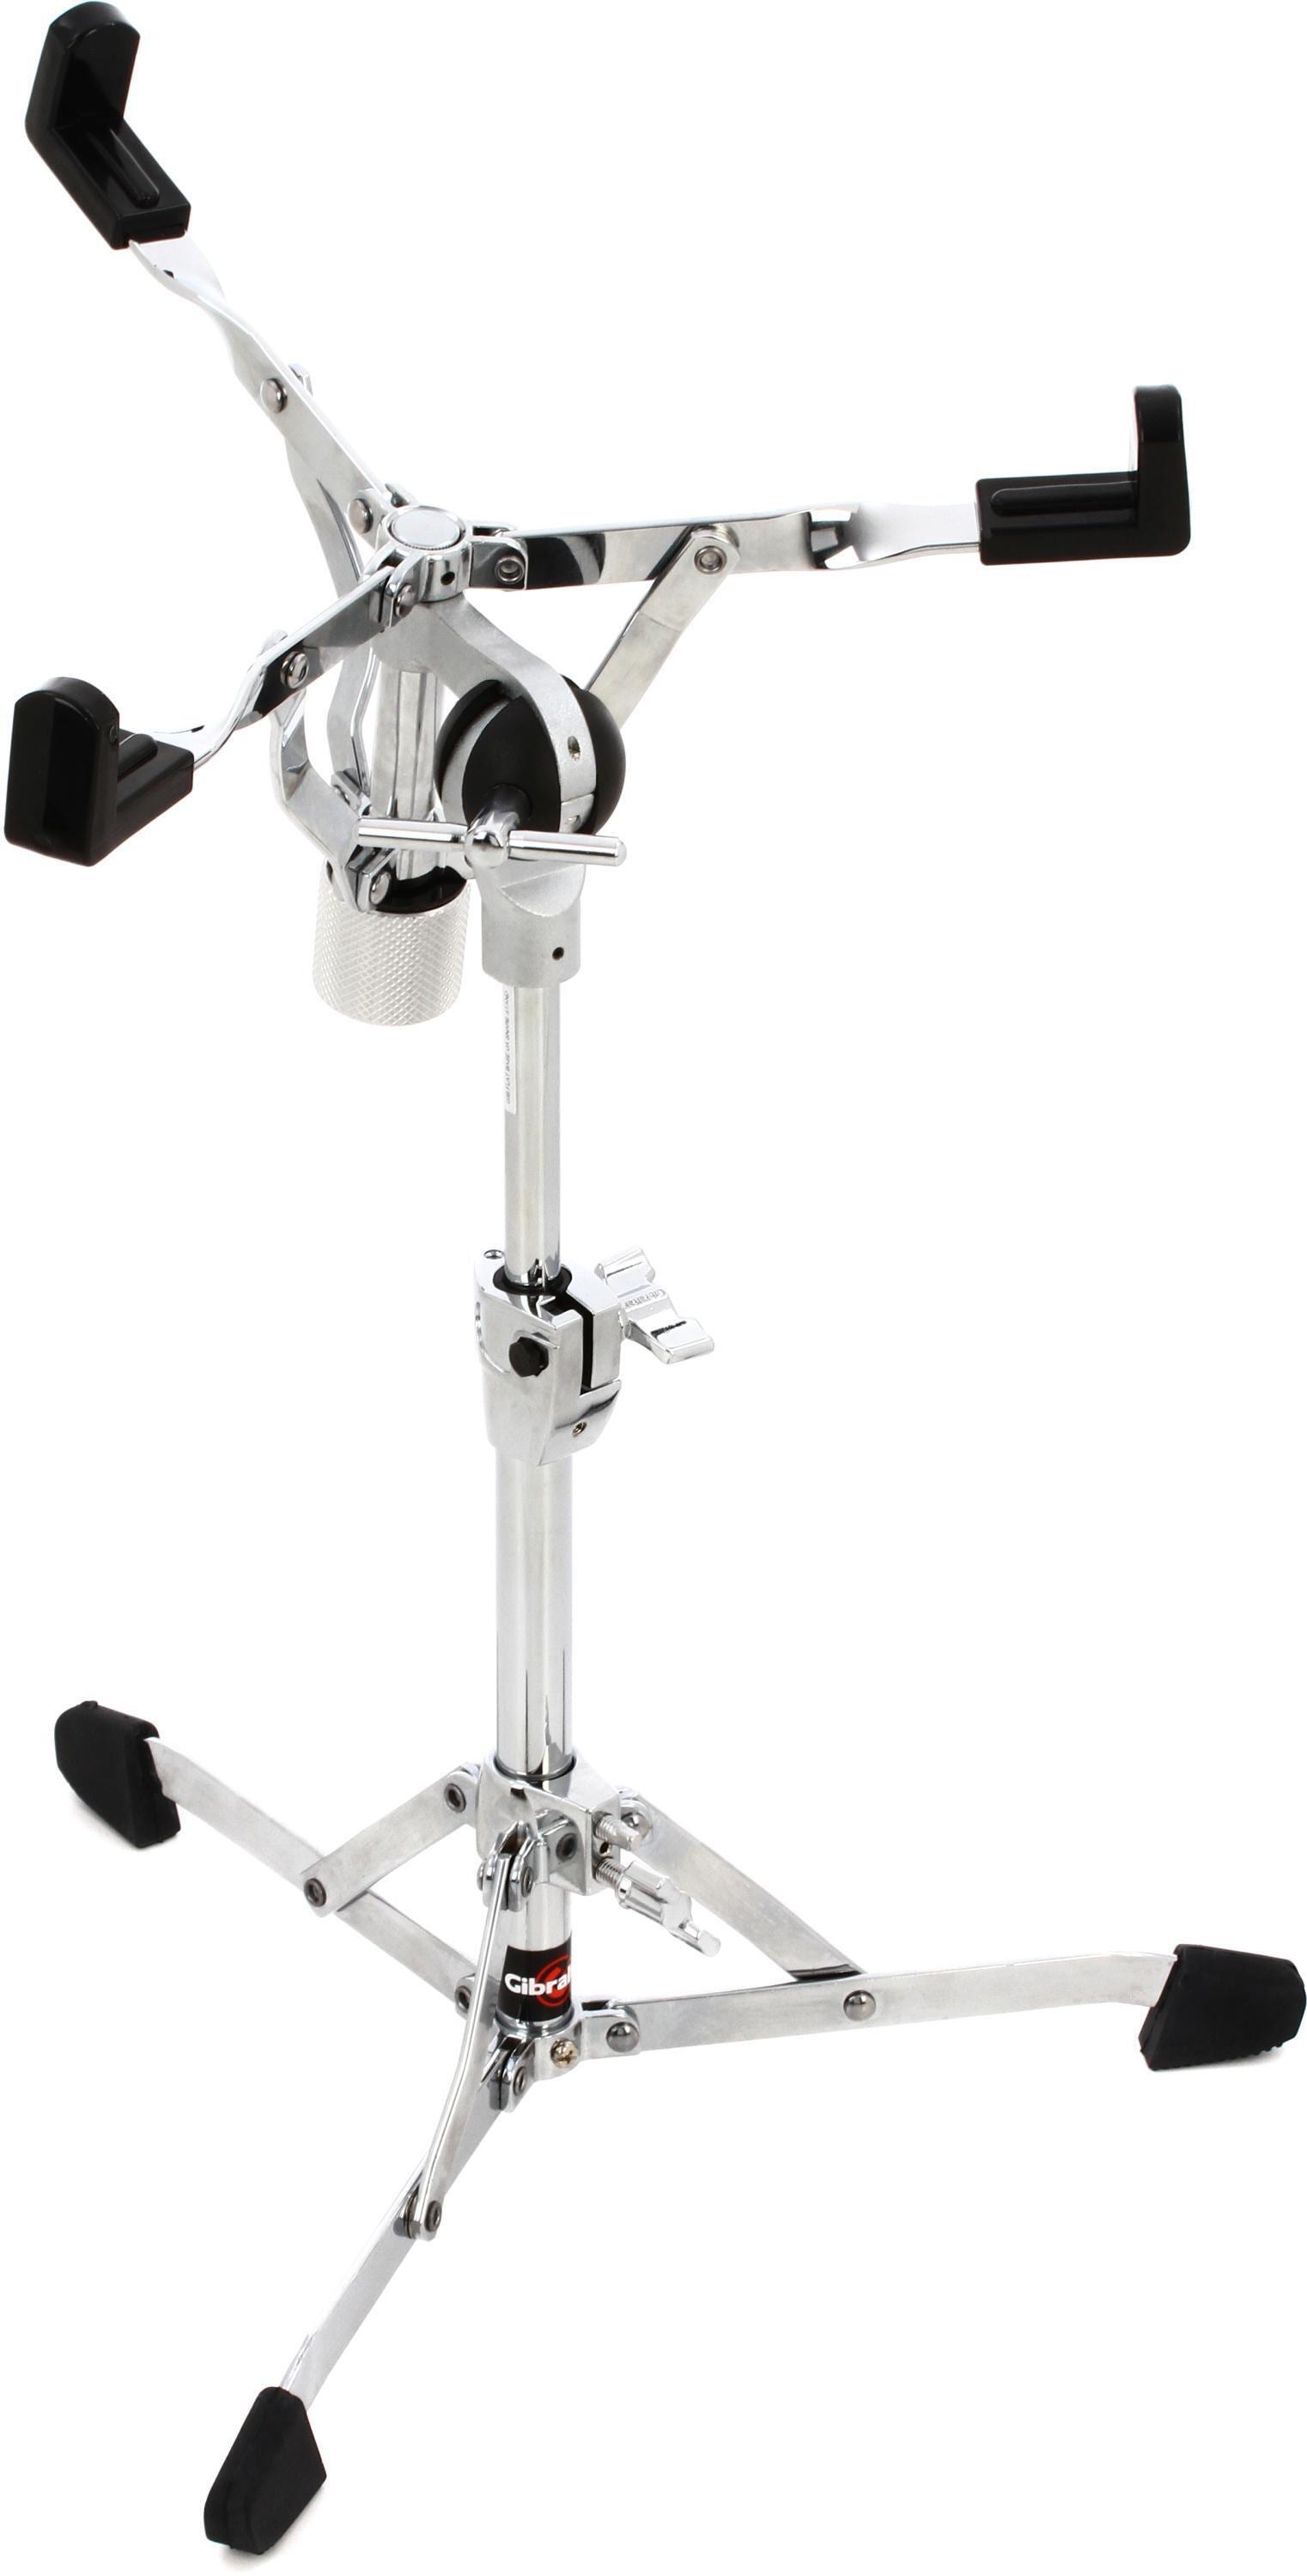 Adjustable Height Snare Drum Stand with Double Braced Percussion Hardware Kit for Snares, Tom Drums, and Practice Pad - Heavy-Duty Weight Mount and